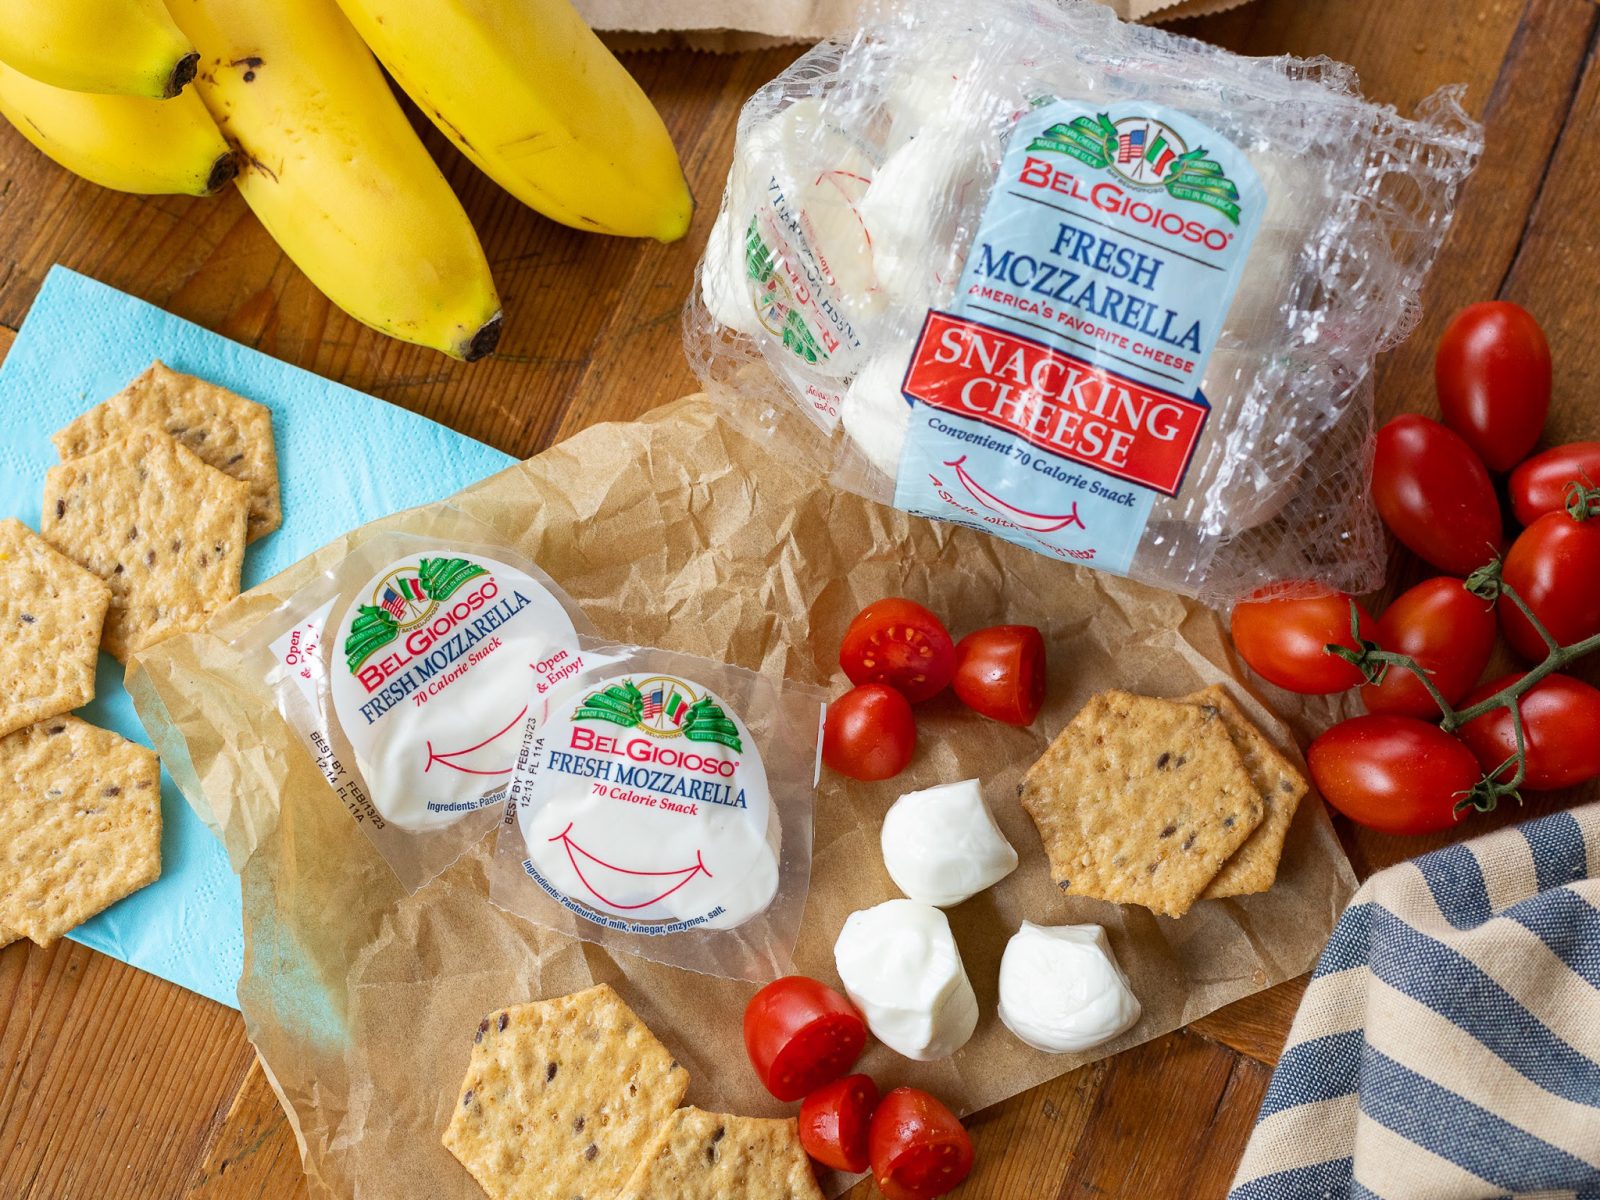 Get BelGioioso Snacking Cheese For Just $3.49 At Kroger